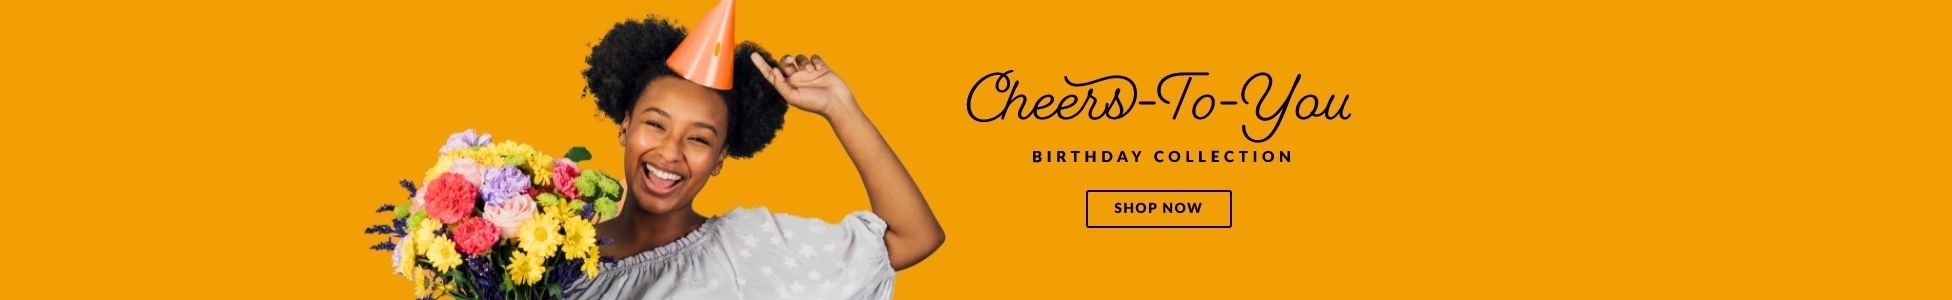 cheers-to-you-birthday-collection-cta.jpg